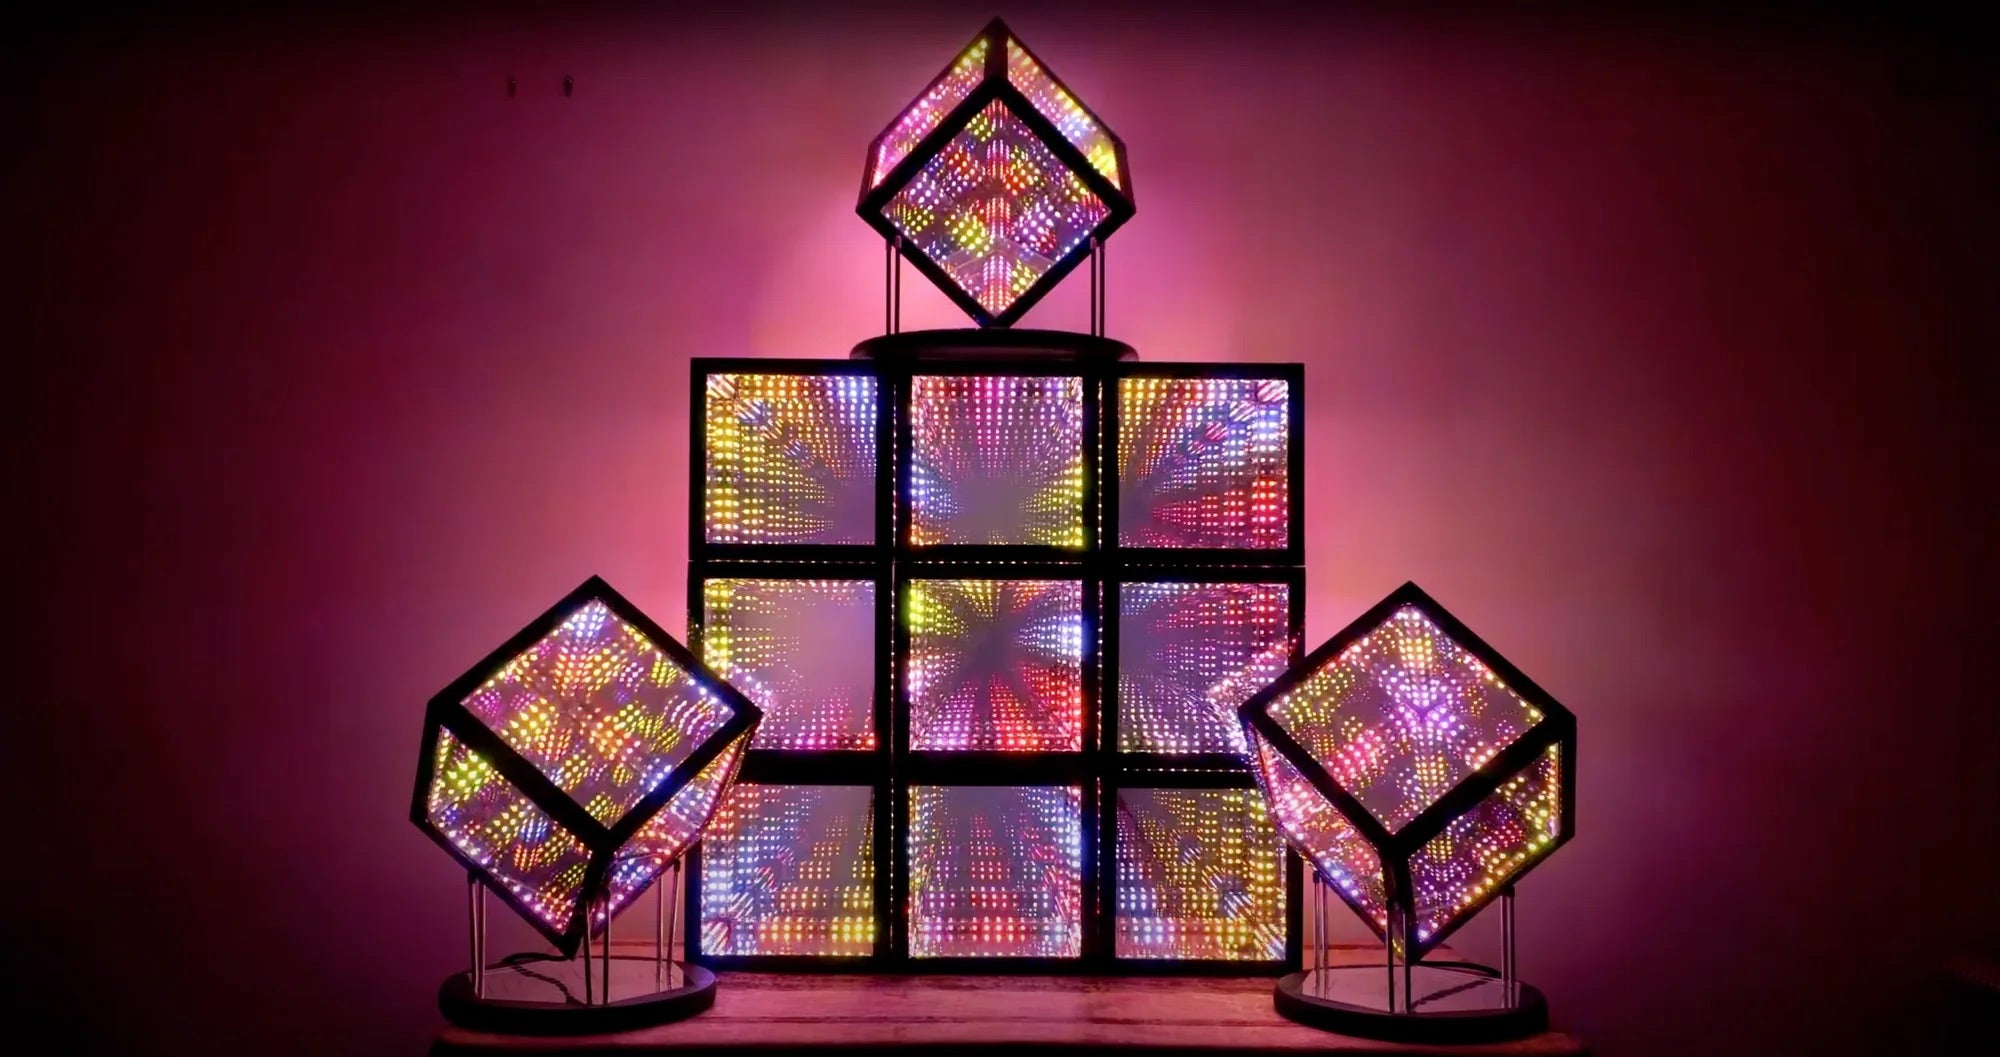 HyperCubes for decorative lighting ideas for family gatherings, having friends over, and more